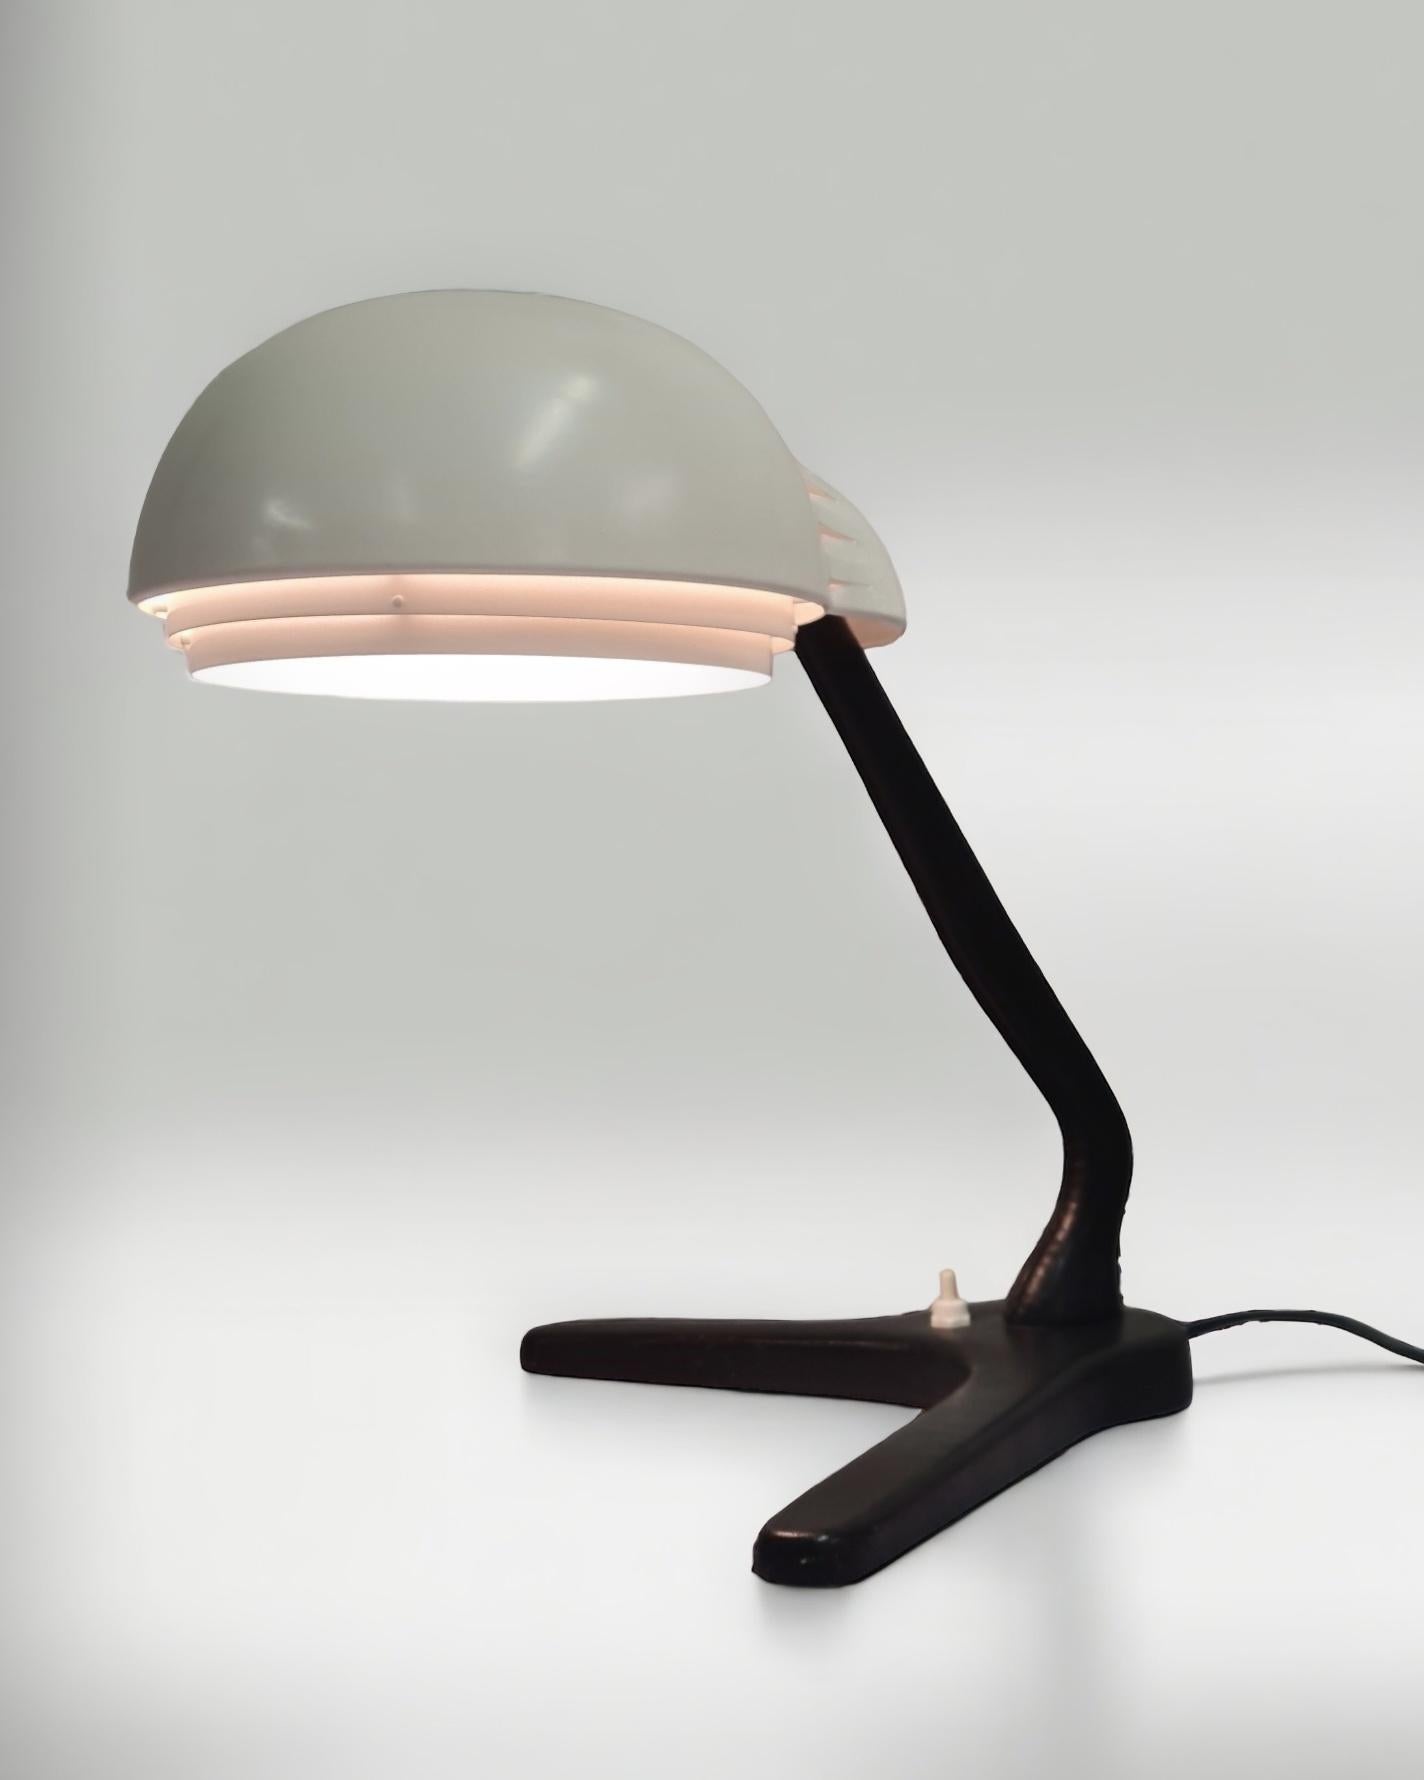 This table lamp model A704 was designed by Alvar Aalto and manufactured by Valaistustyö in the 1950s.  Viljo Hirvonen and Alvar Aalto started their work collaborations in the 1950s.  Viljo and the other staff at Valaistustyö were higly qualified and